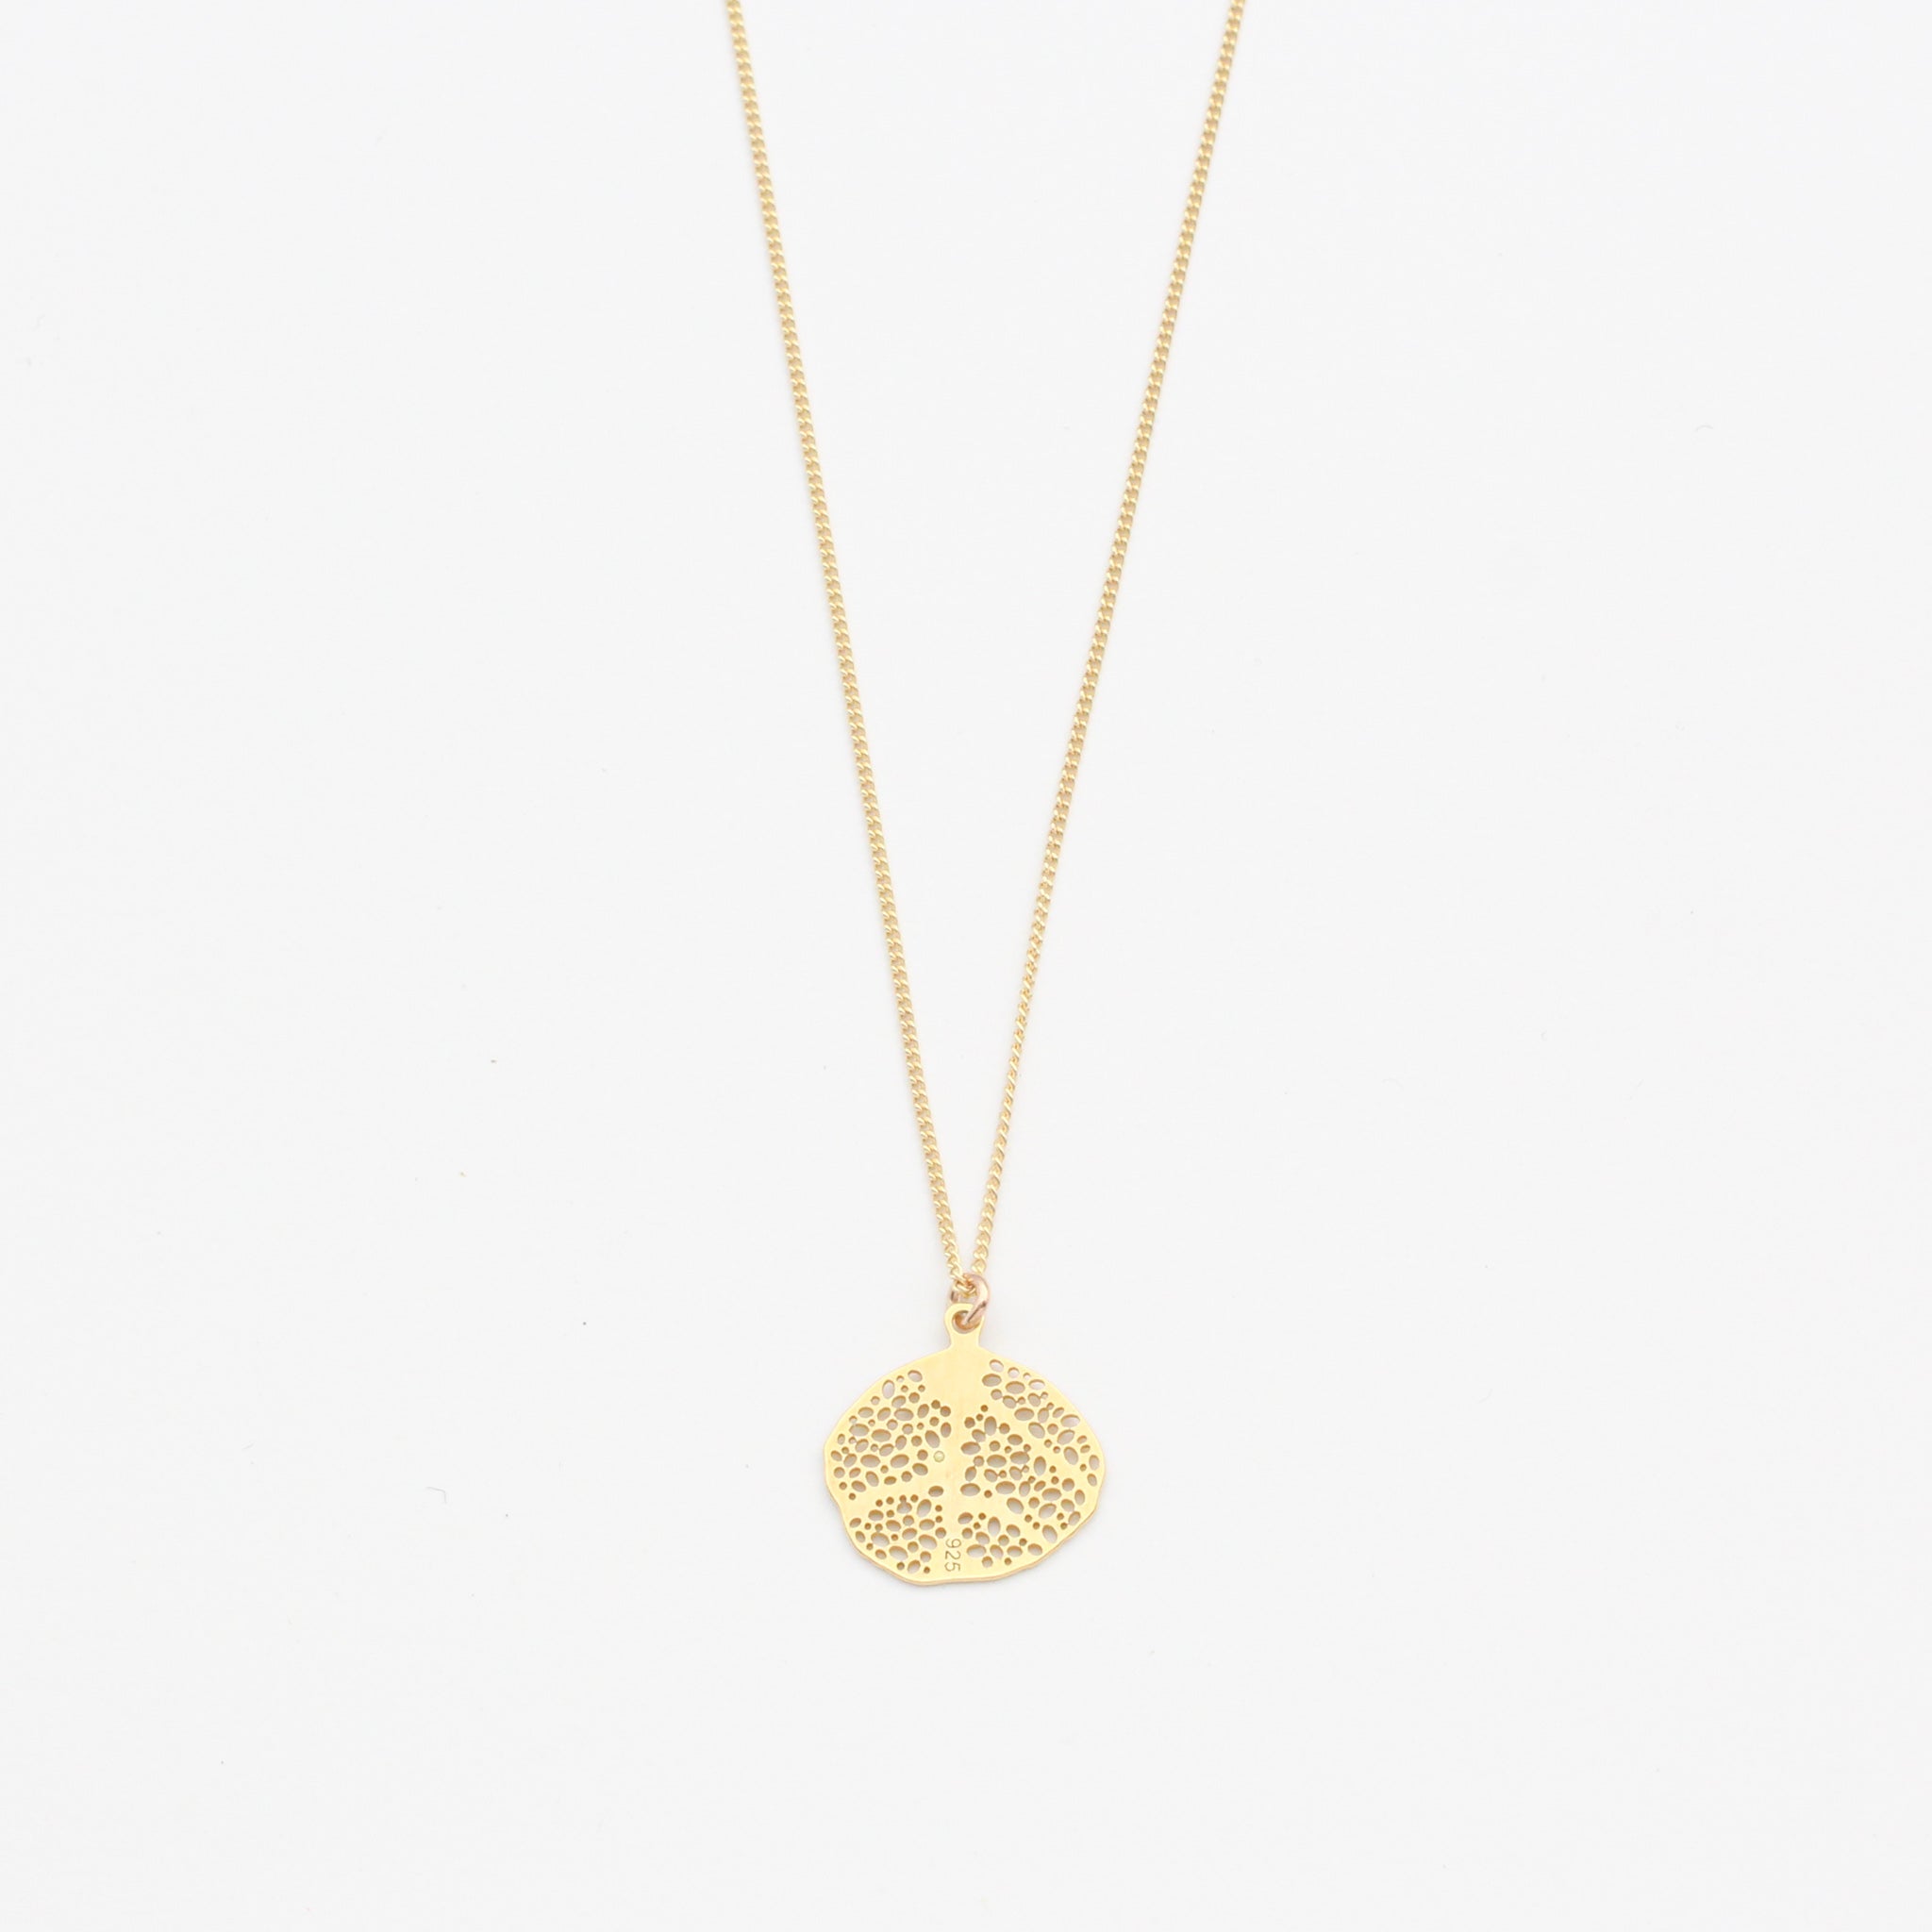 Kette "Small Coral Leaf" gold